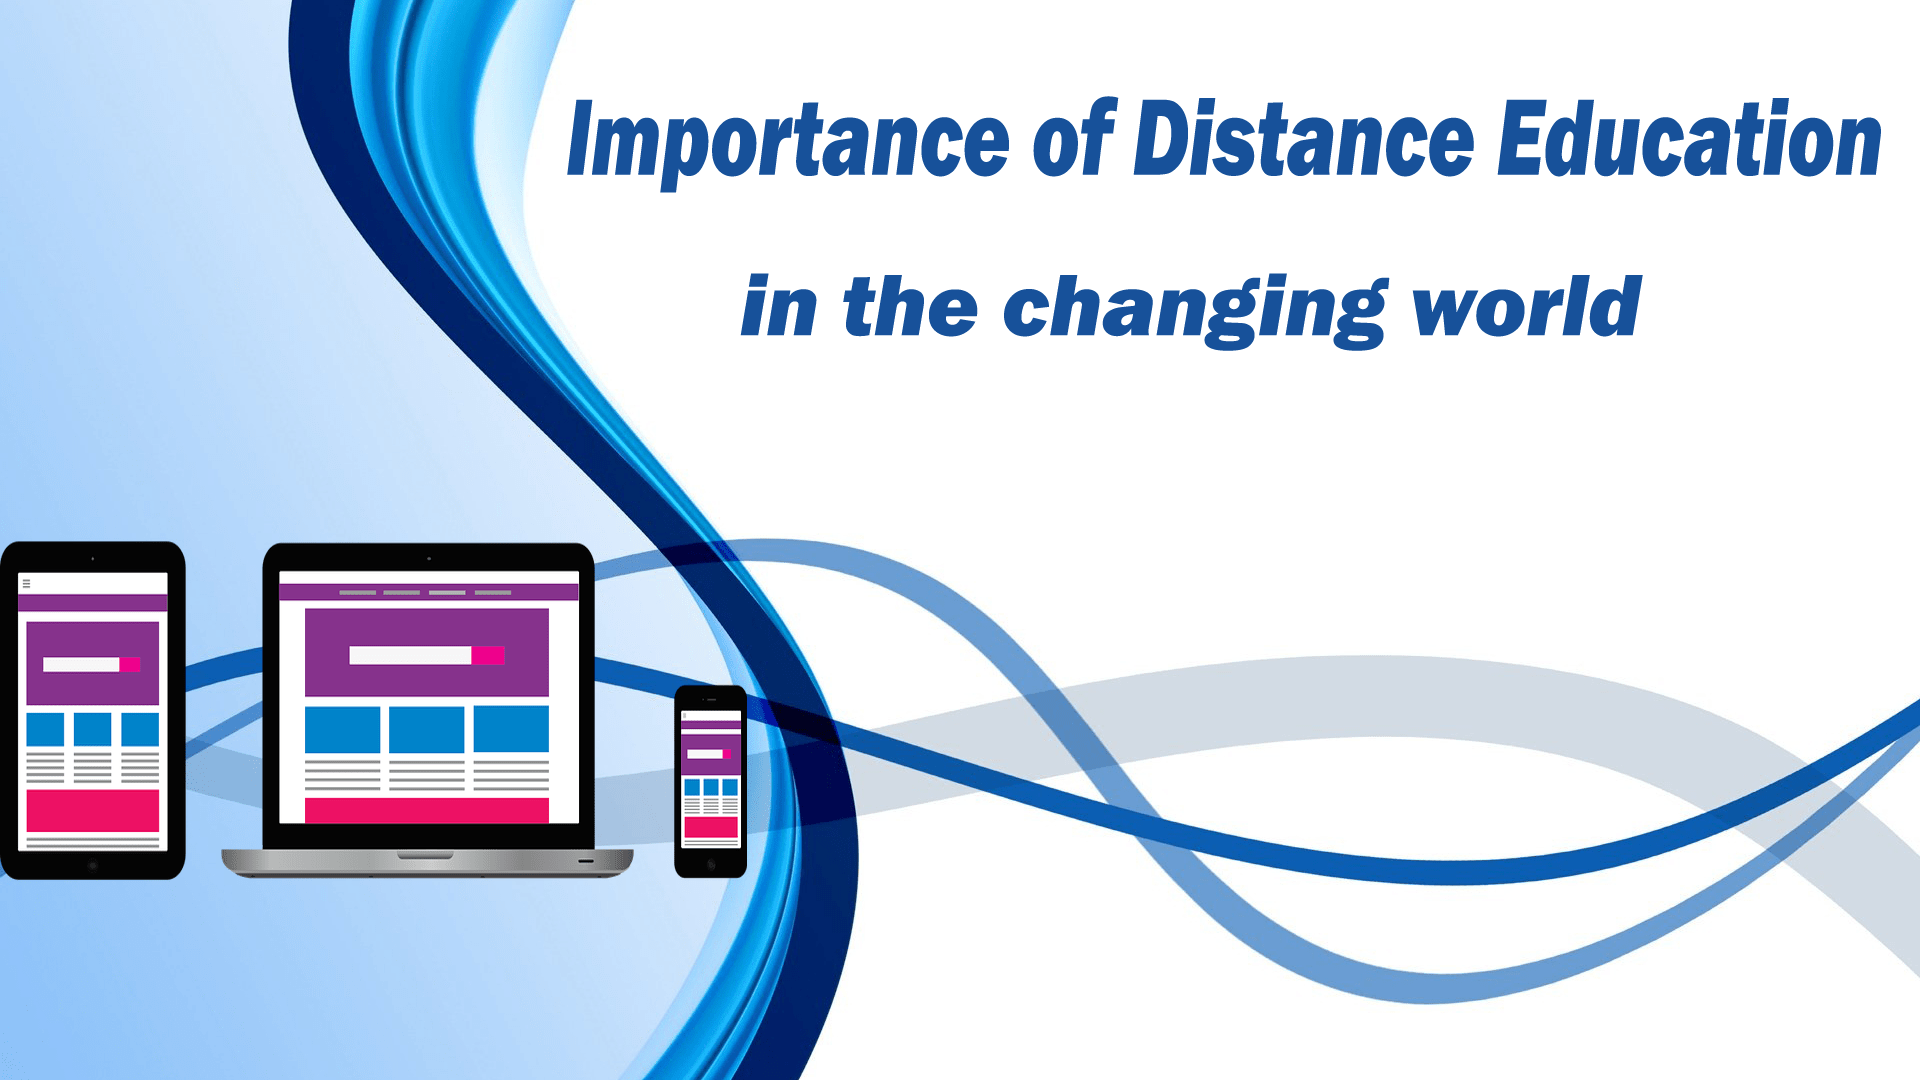 a short note on distance education